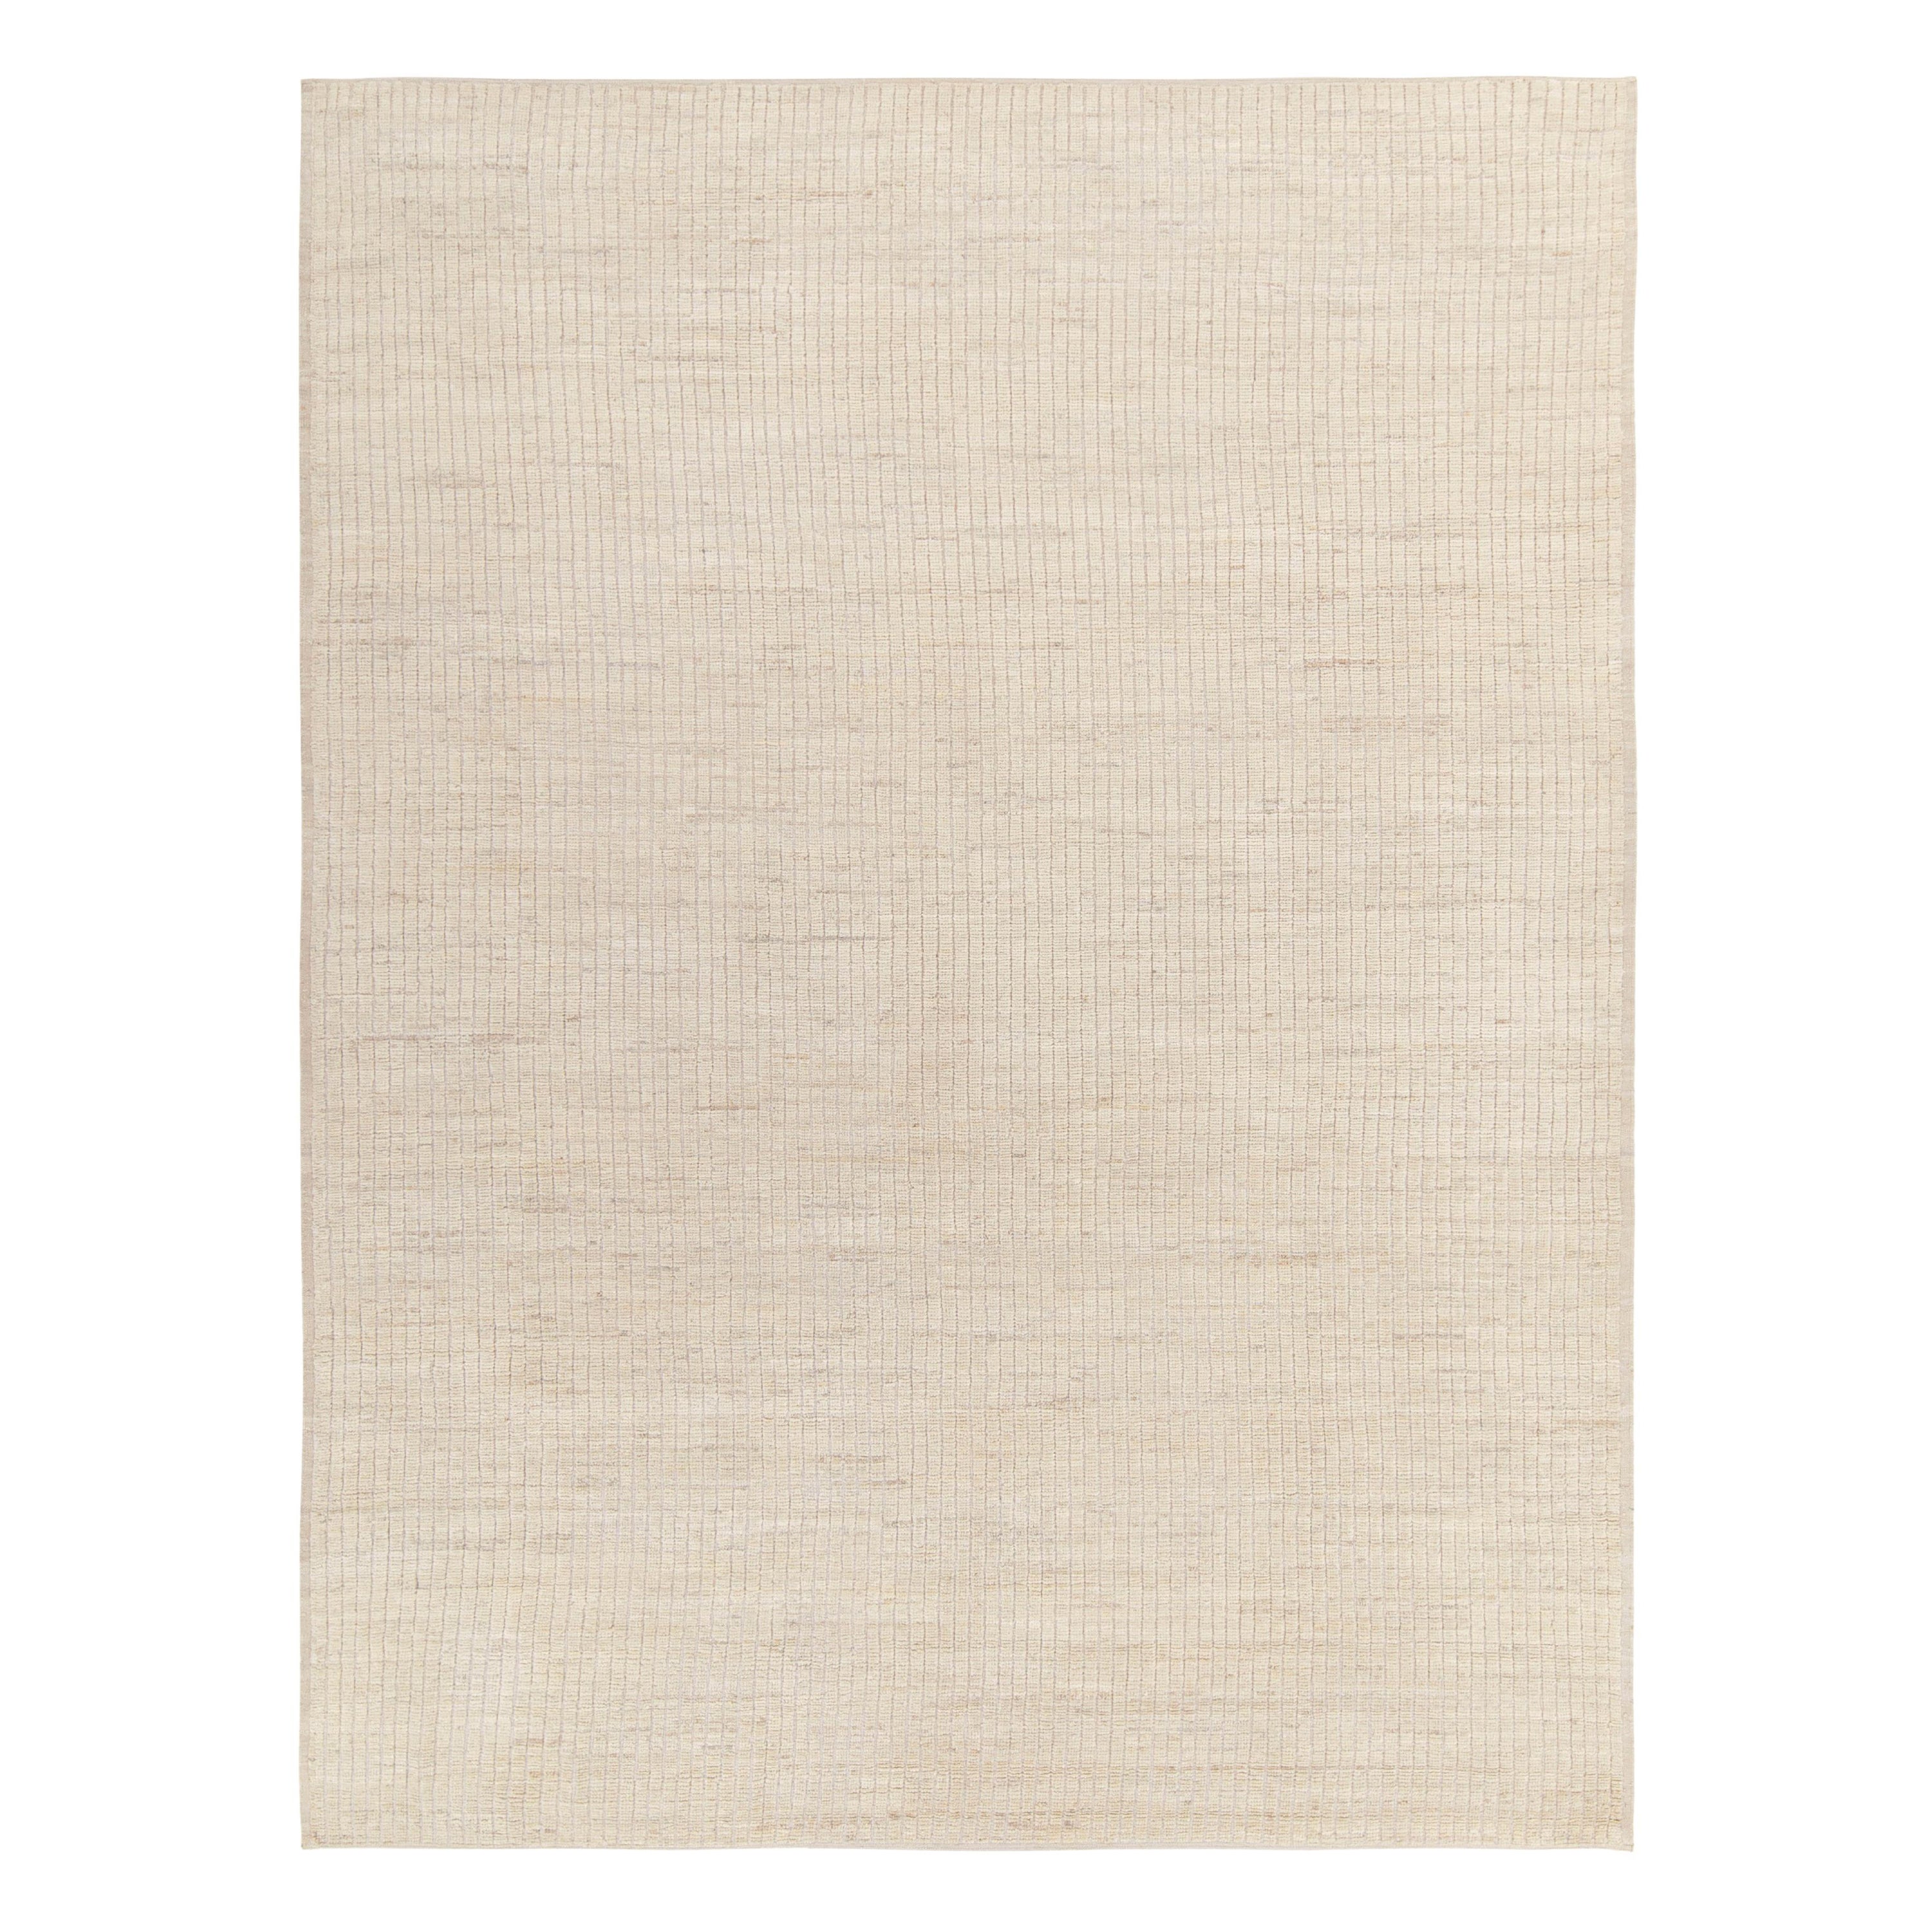 Rug & Kilim's Contemporary Rug in off White, Beige High-Low Geometric Pattern For Sale